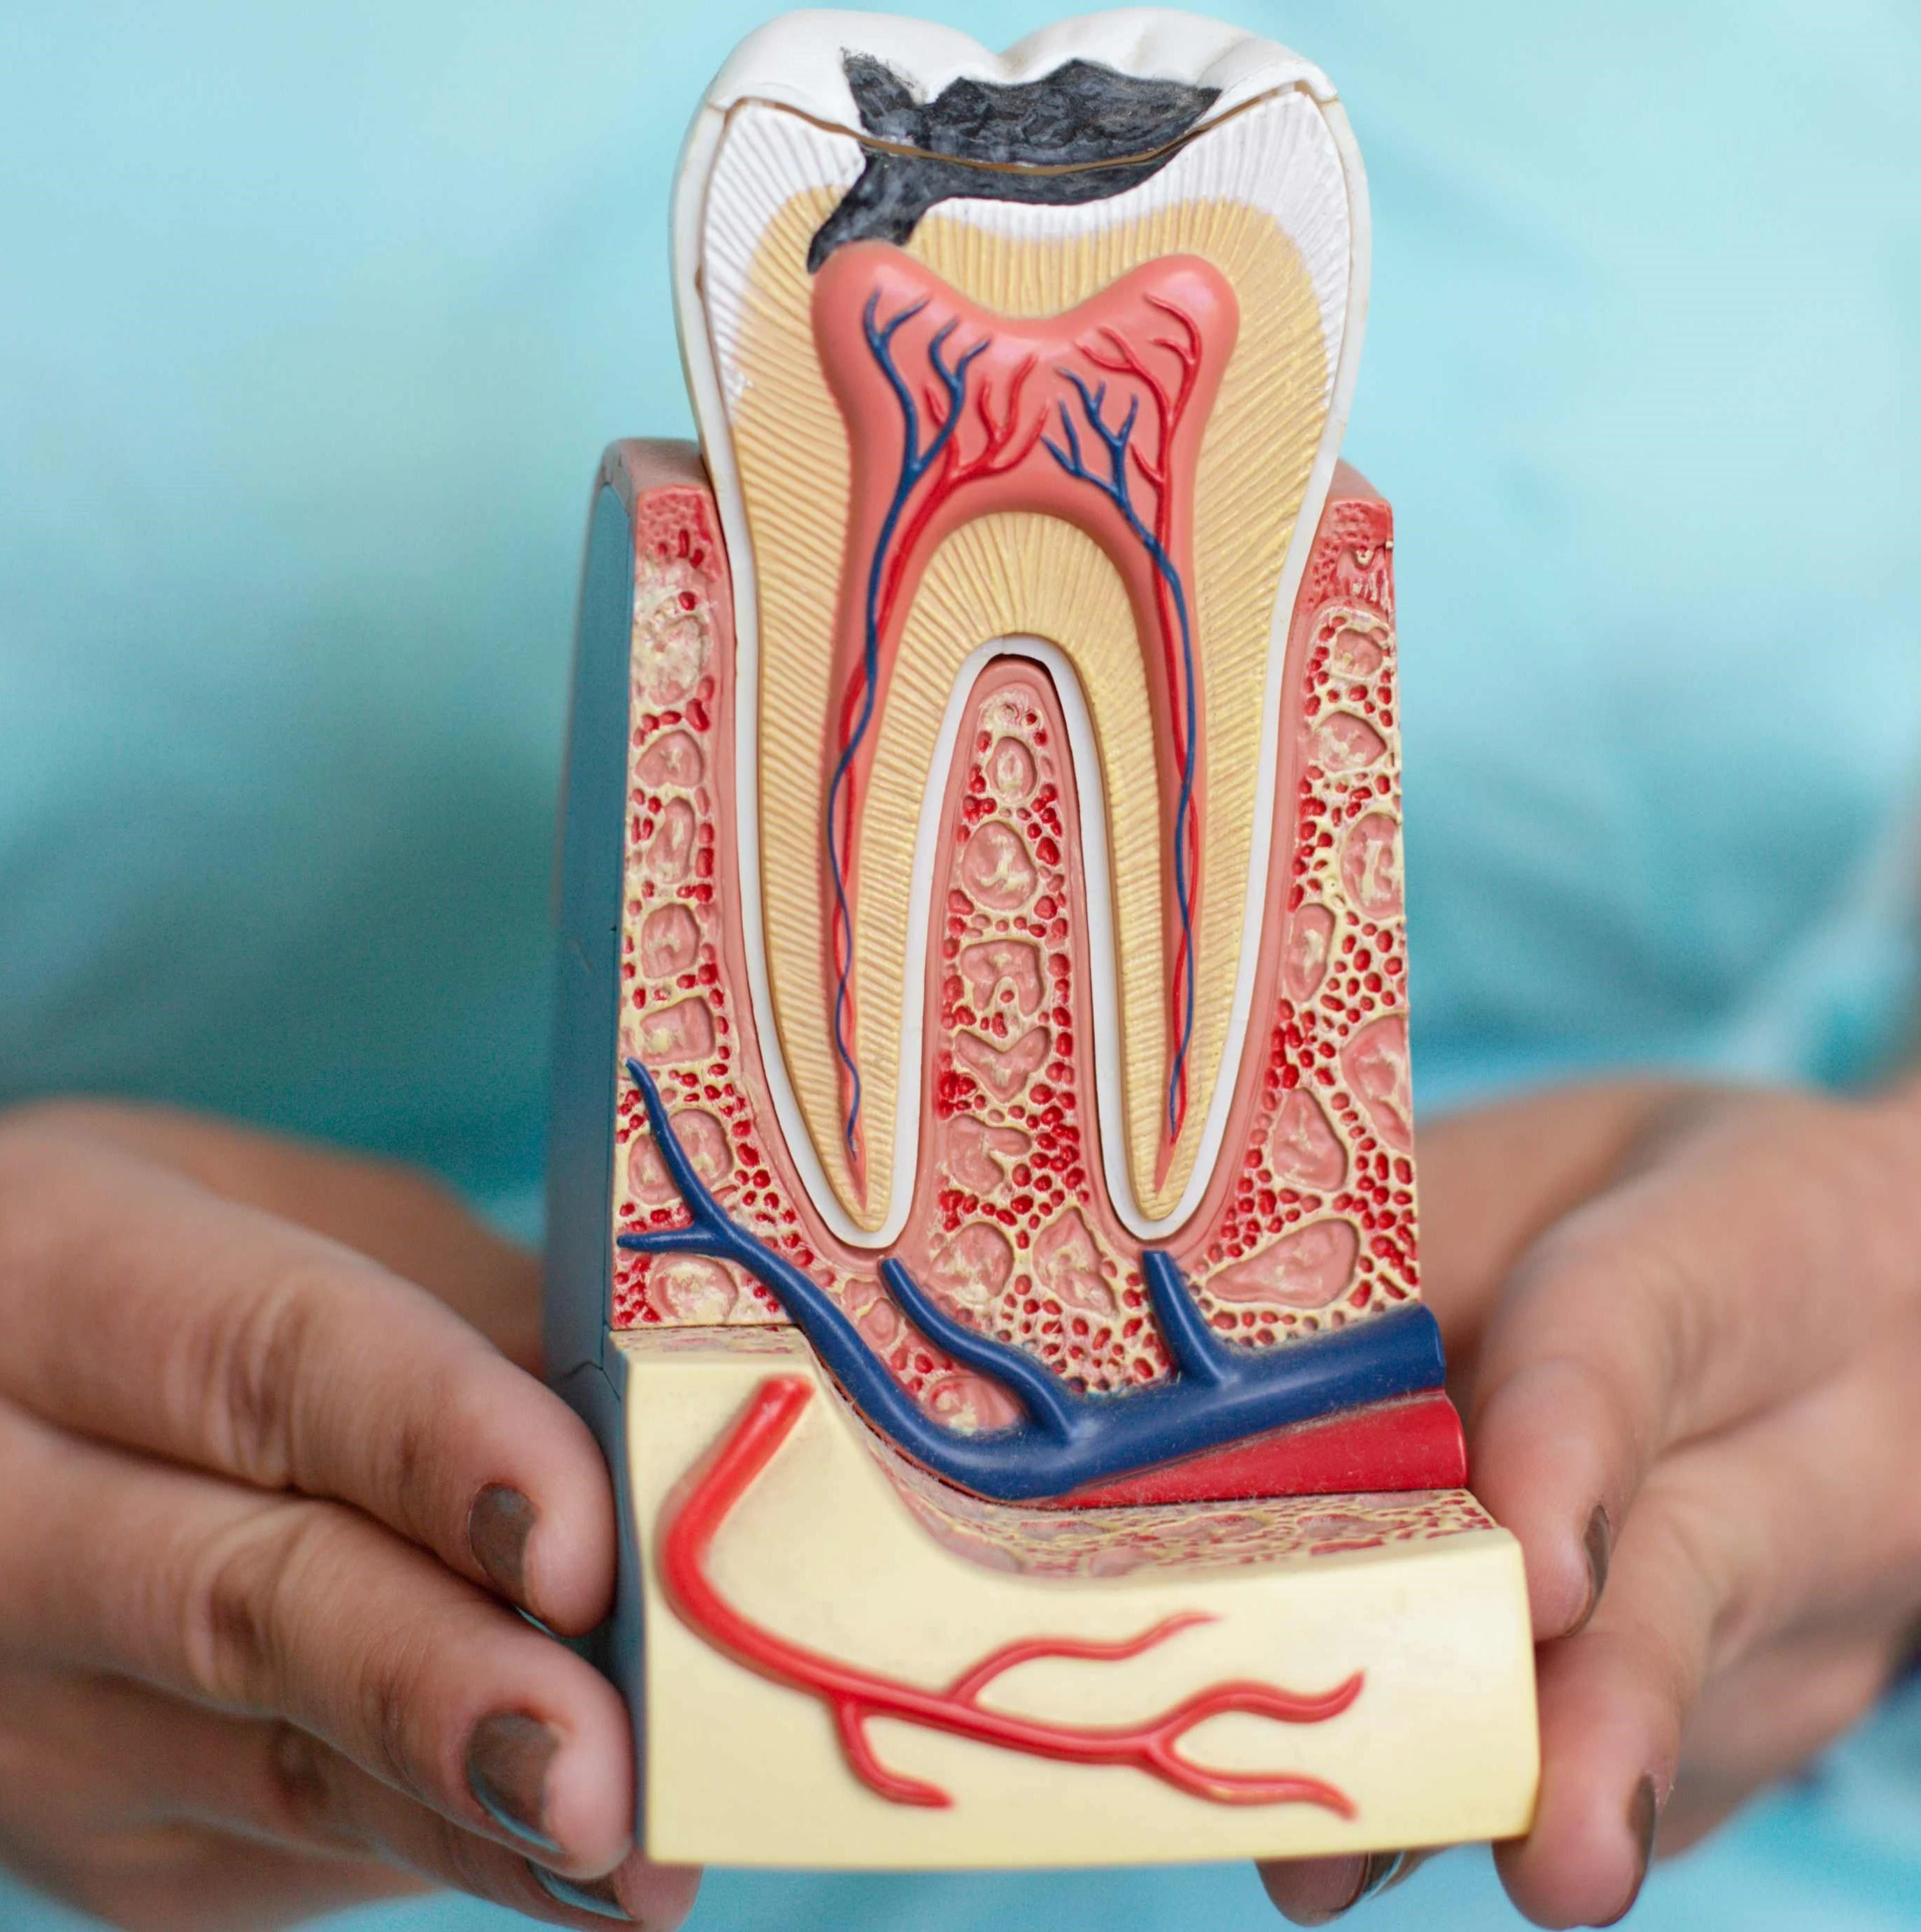 When Do You Need a Root Canal